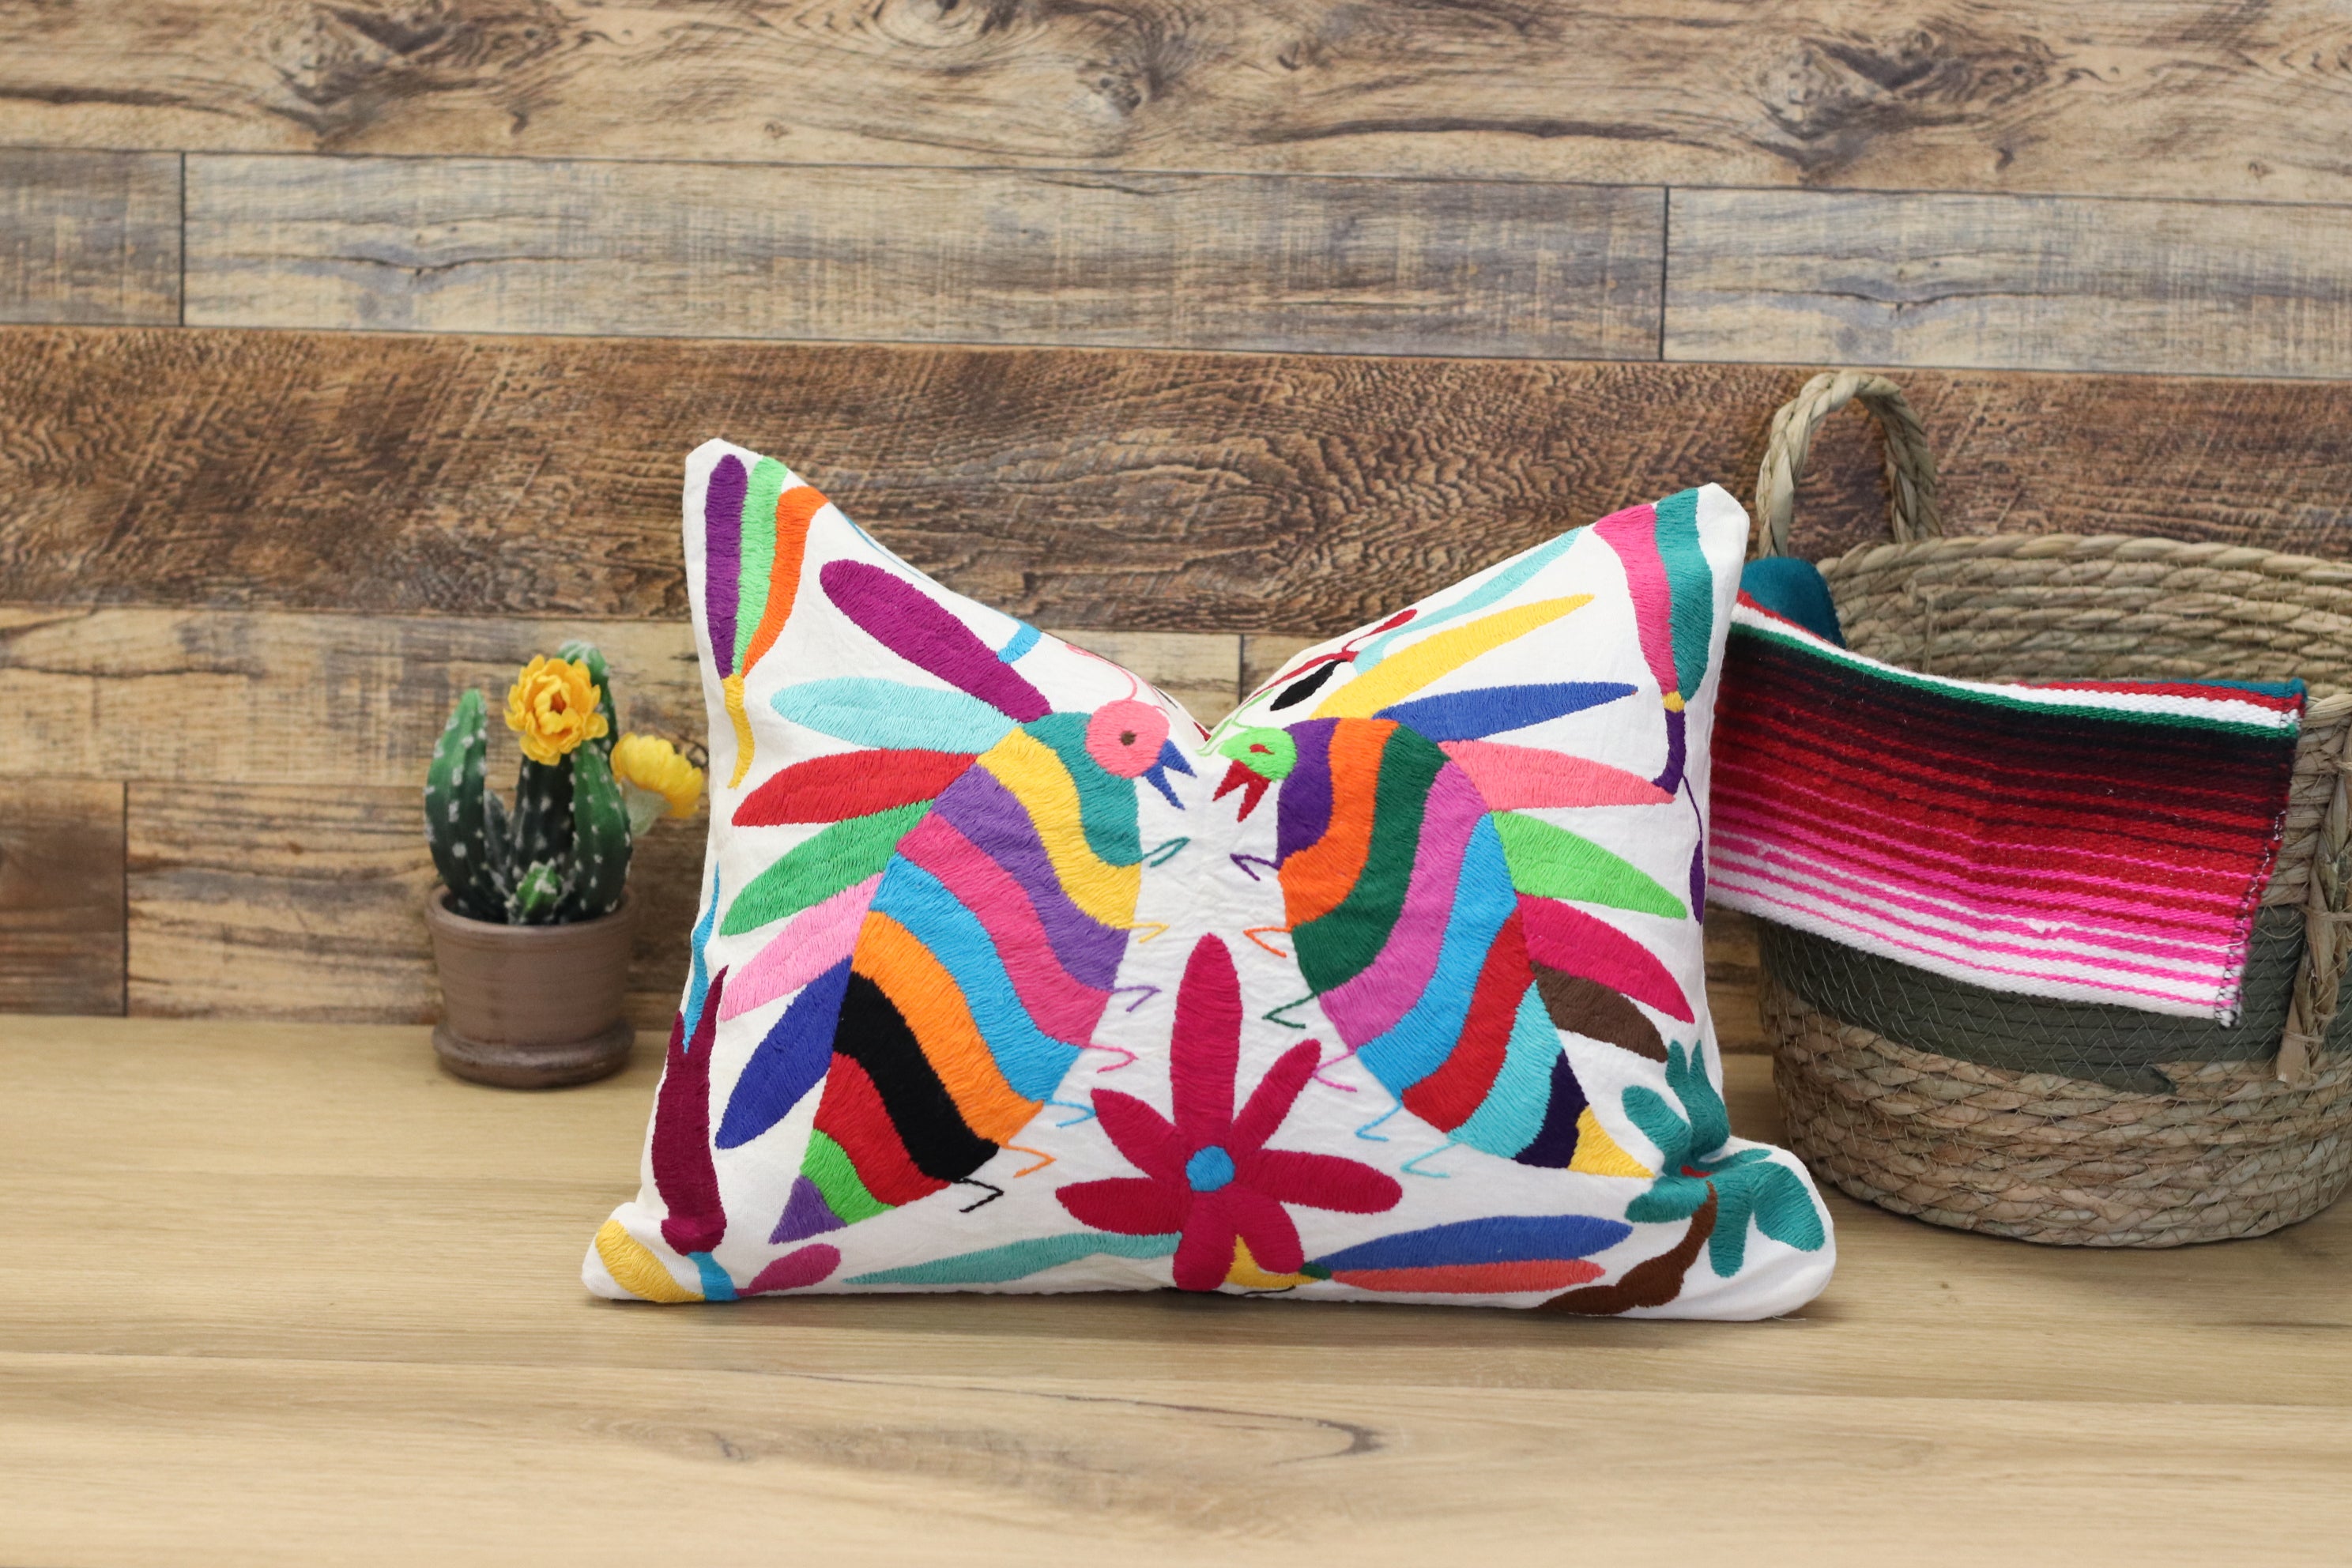 Otomi Tenango Pillow Cover Hand Embroidered with Cute Bugs and Flowers in Vibrant Colors. Handmade in Mexico. Ships from the USA. Buy now at www.felipeandgrace.com. 